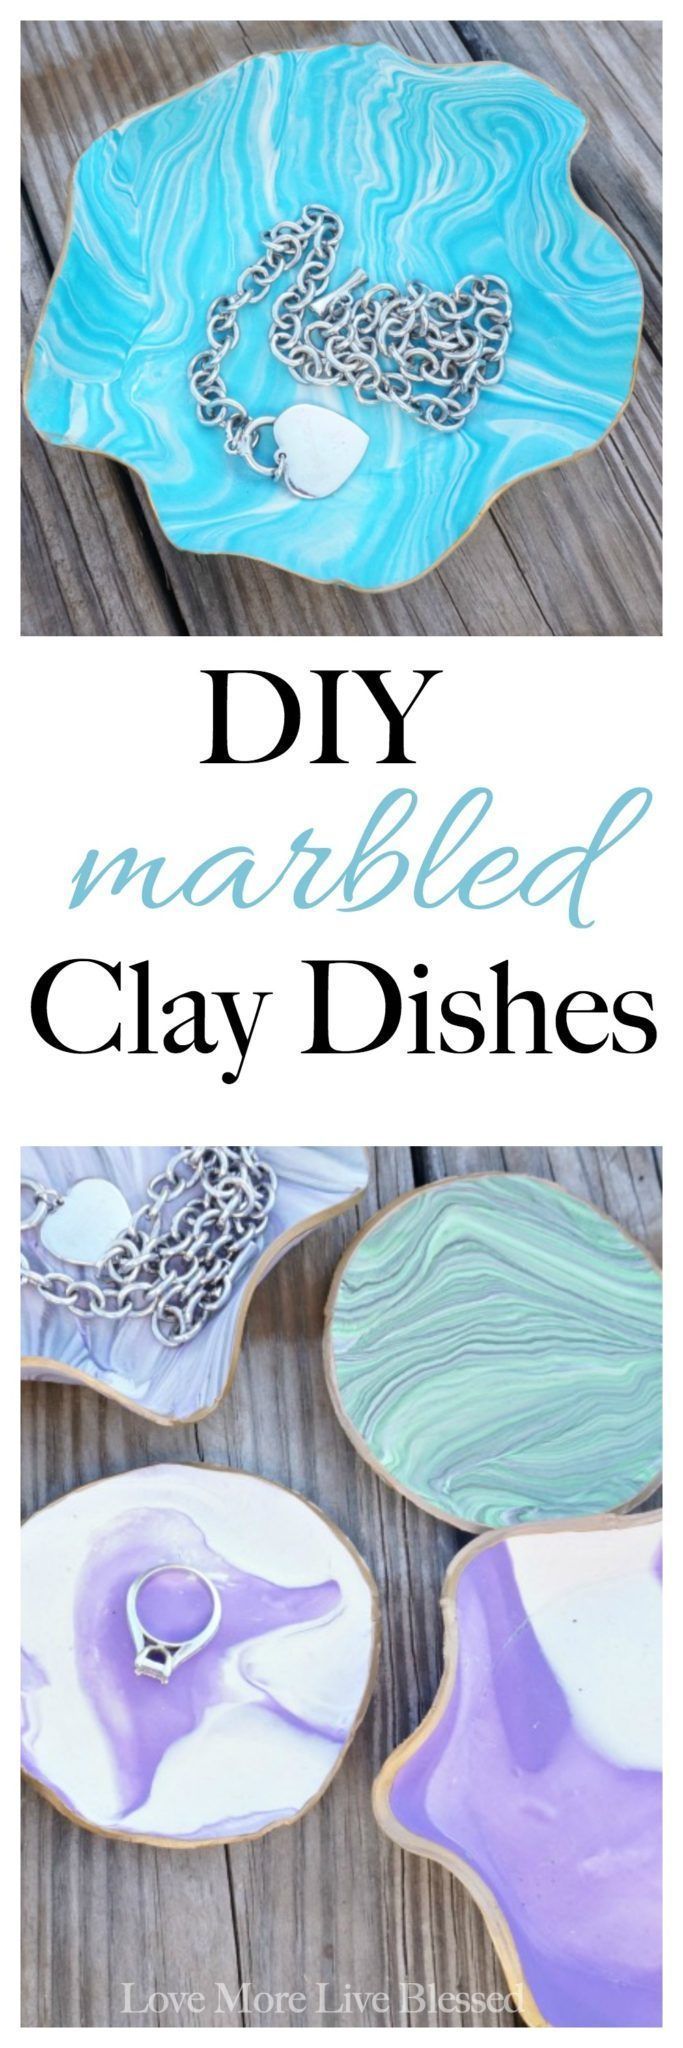 DIY Marbled Clay Dishes - Love More Live Blessed - DIY Marbled Clay Dishes - Love More Live Blessed -   16 diy Presents faceis ideas